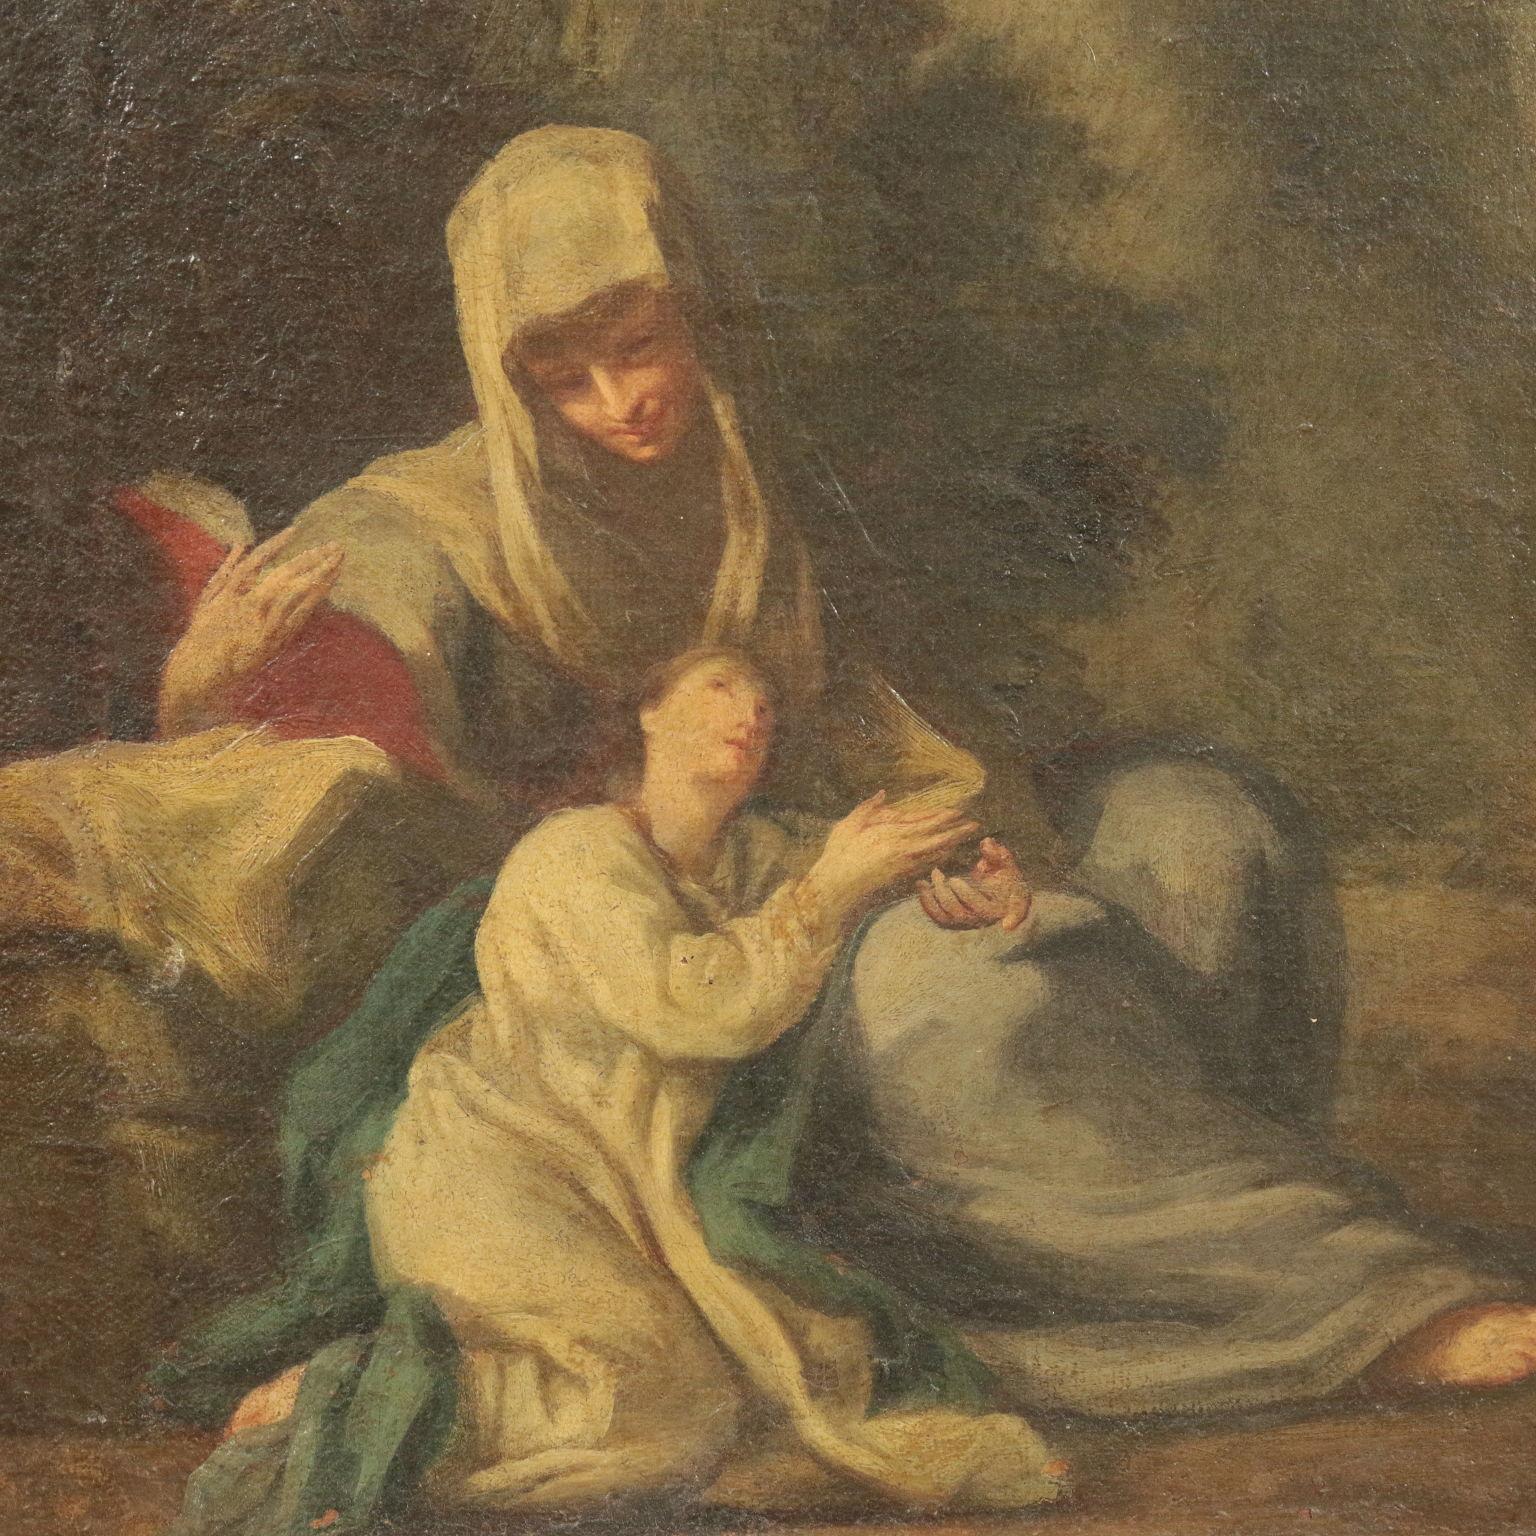 Oil on canvas. Attribution to Ferdinando Porta on the back.
The scene depicts the moment of rest of the Sacred Family, during the flight into Egypt: on the left, sitting on the ground, are Mary reading and Jesus, already a boy, but still childishly